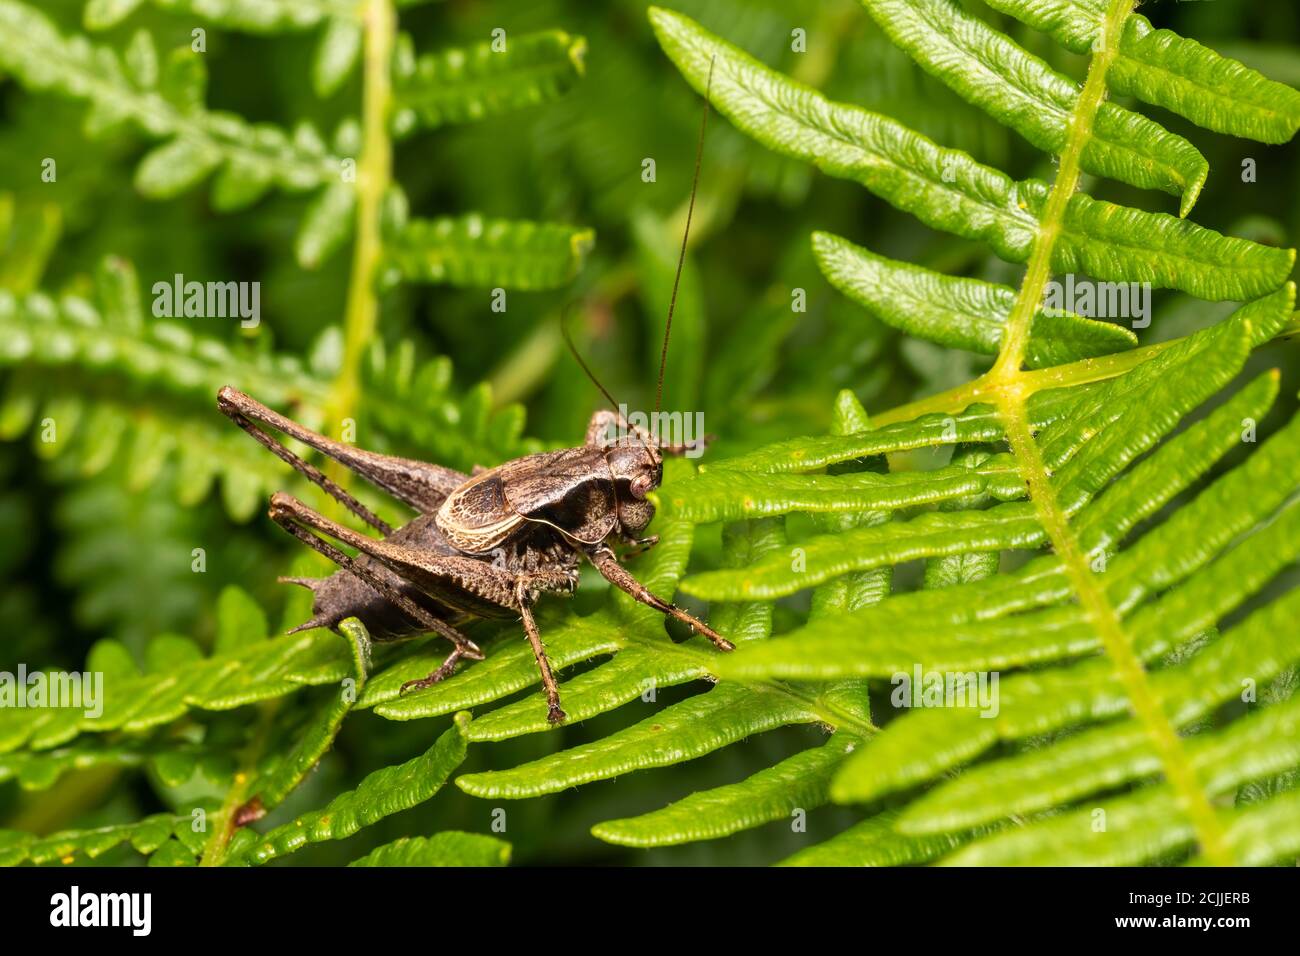 Pholidoptera griseoaptera (Dark Bush Cricket) a common brown insect species found in fields meadows and gardens stock photo Stock Photo